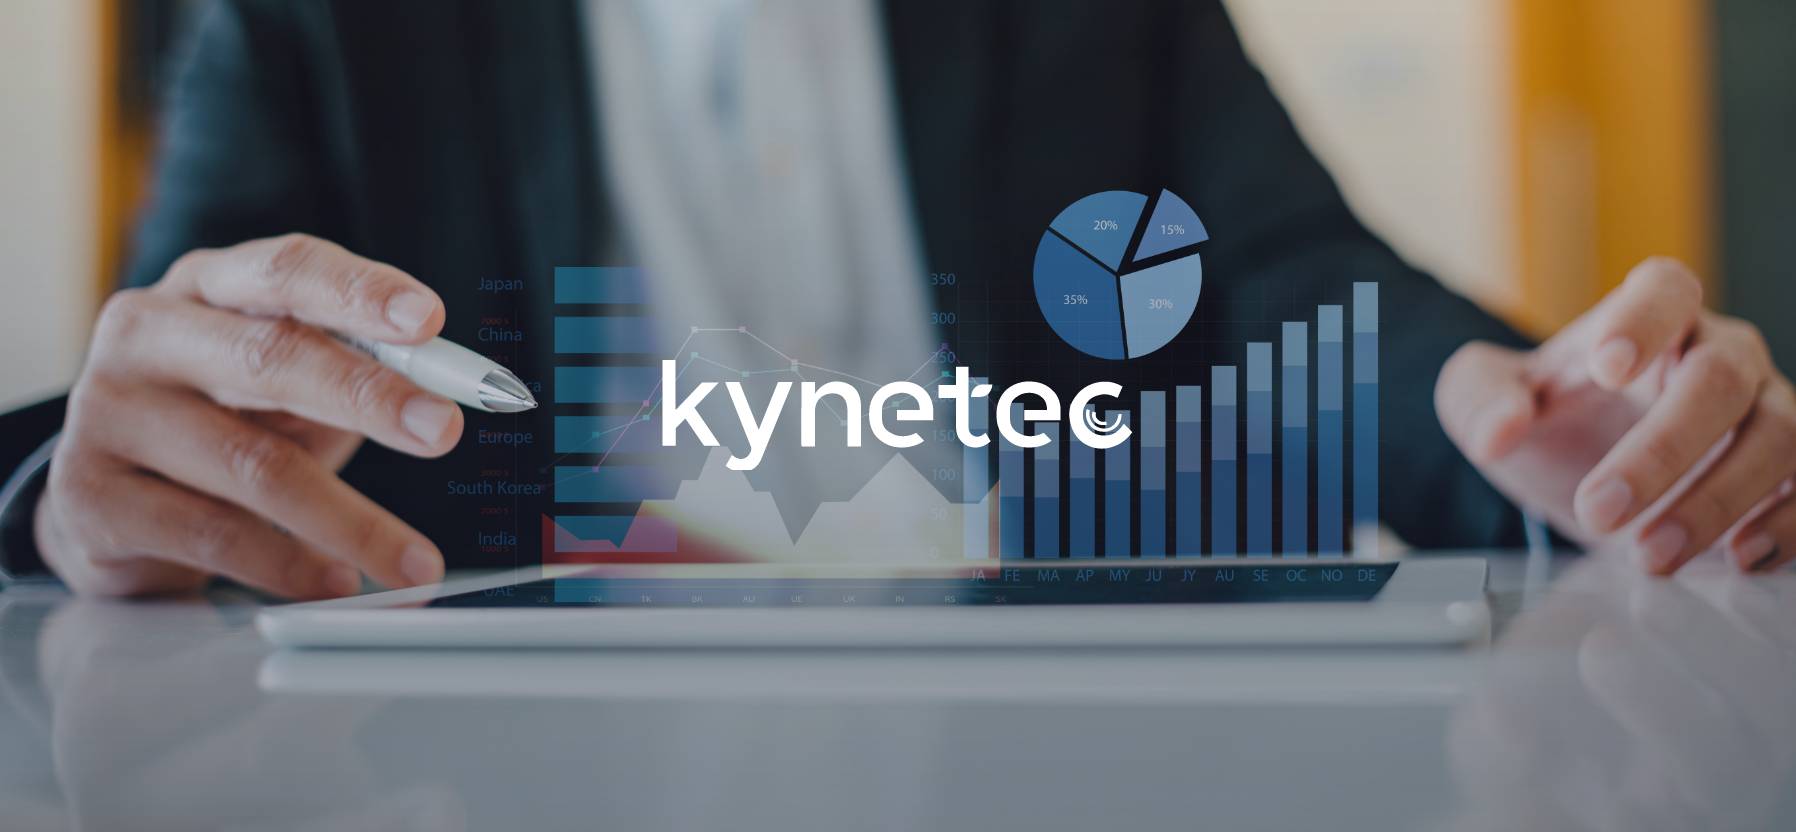 Paine Schwartz Partners Invests in Kynetec, a Leader in Agricultural Market Research@2x